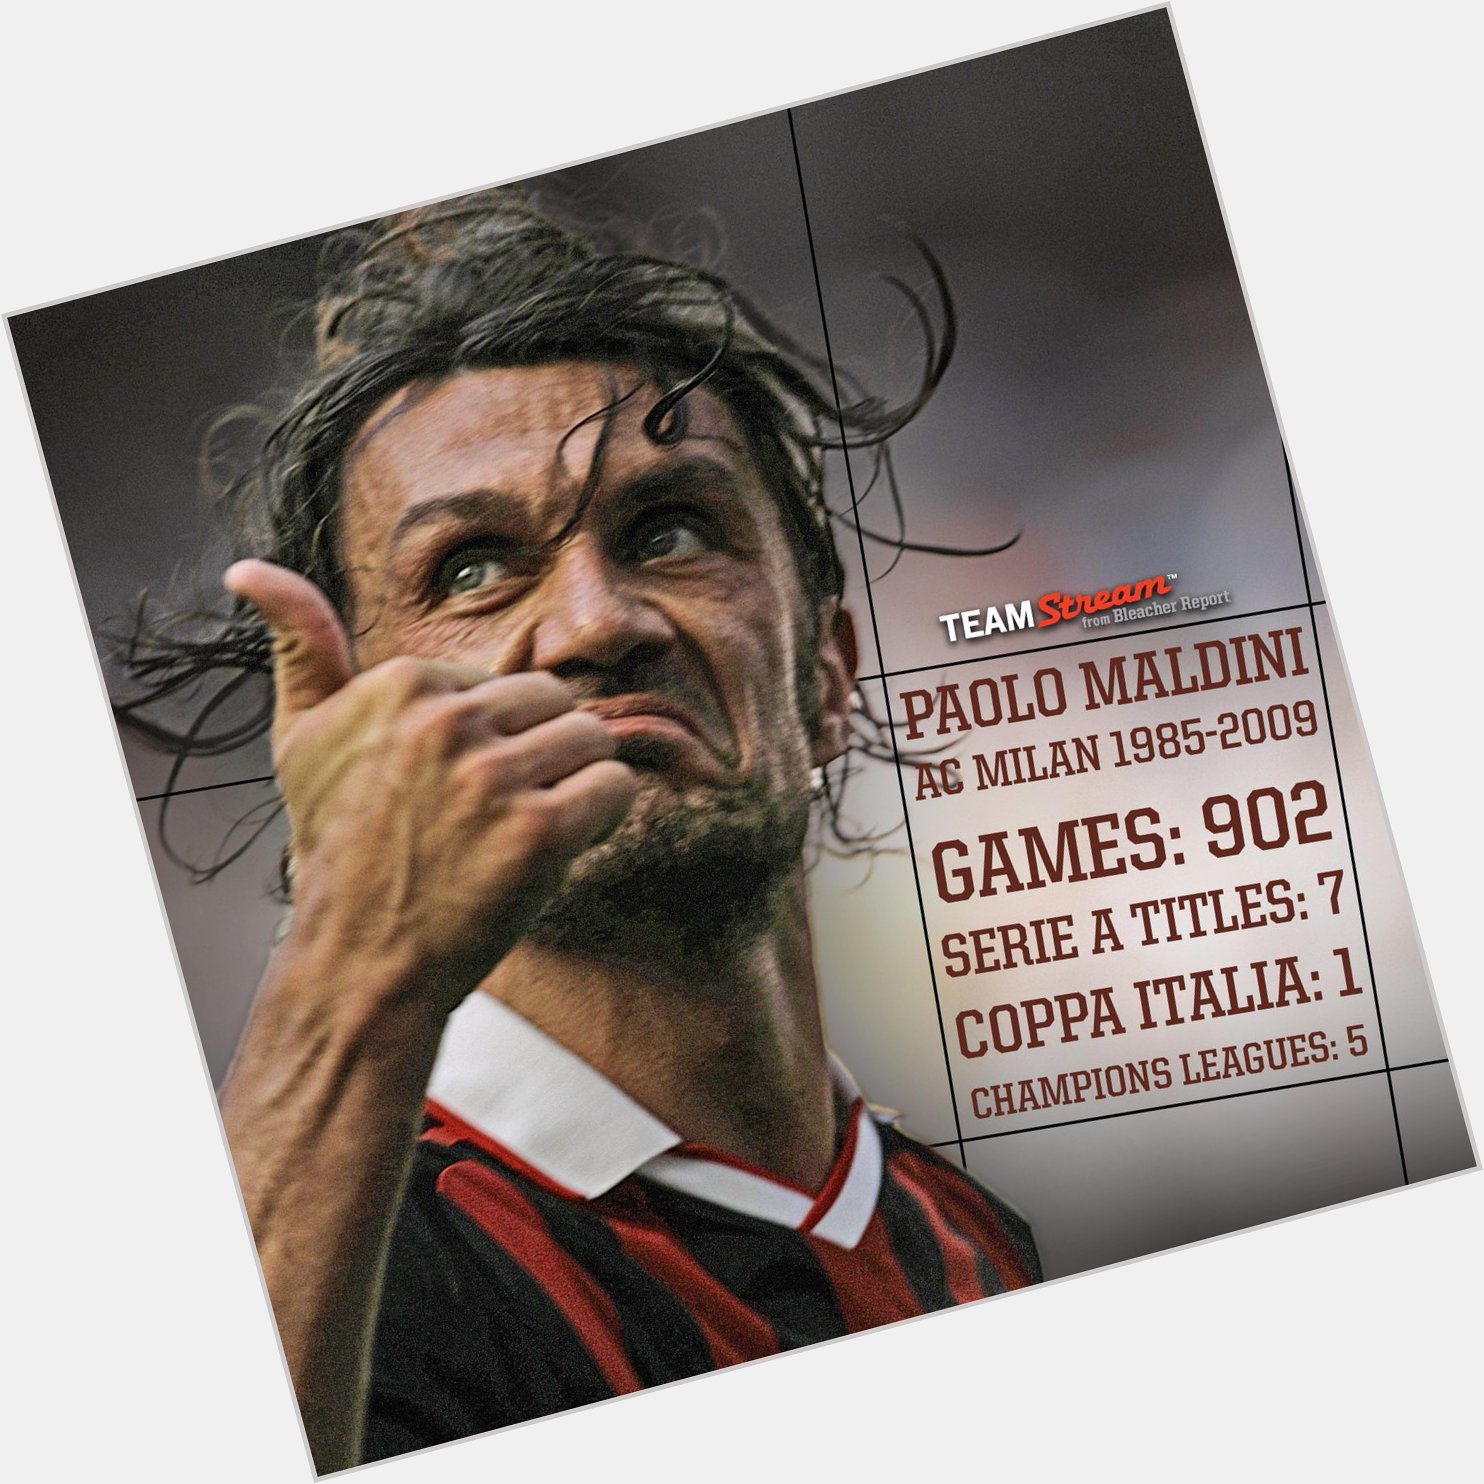 Happy 47th birthday to an legend, Paolo Serie A titles:       Coppa Italia:       